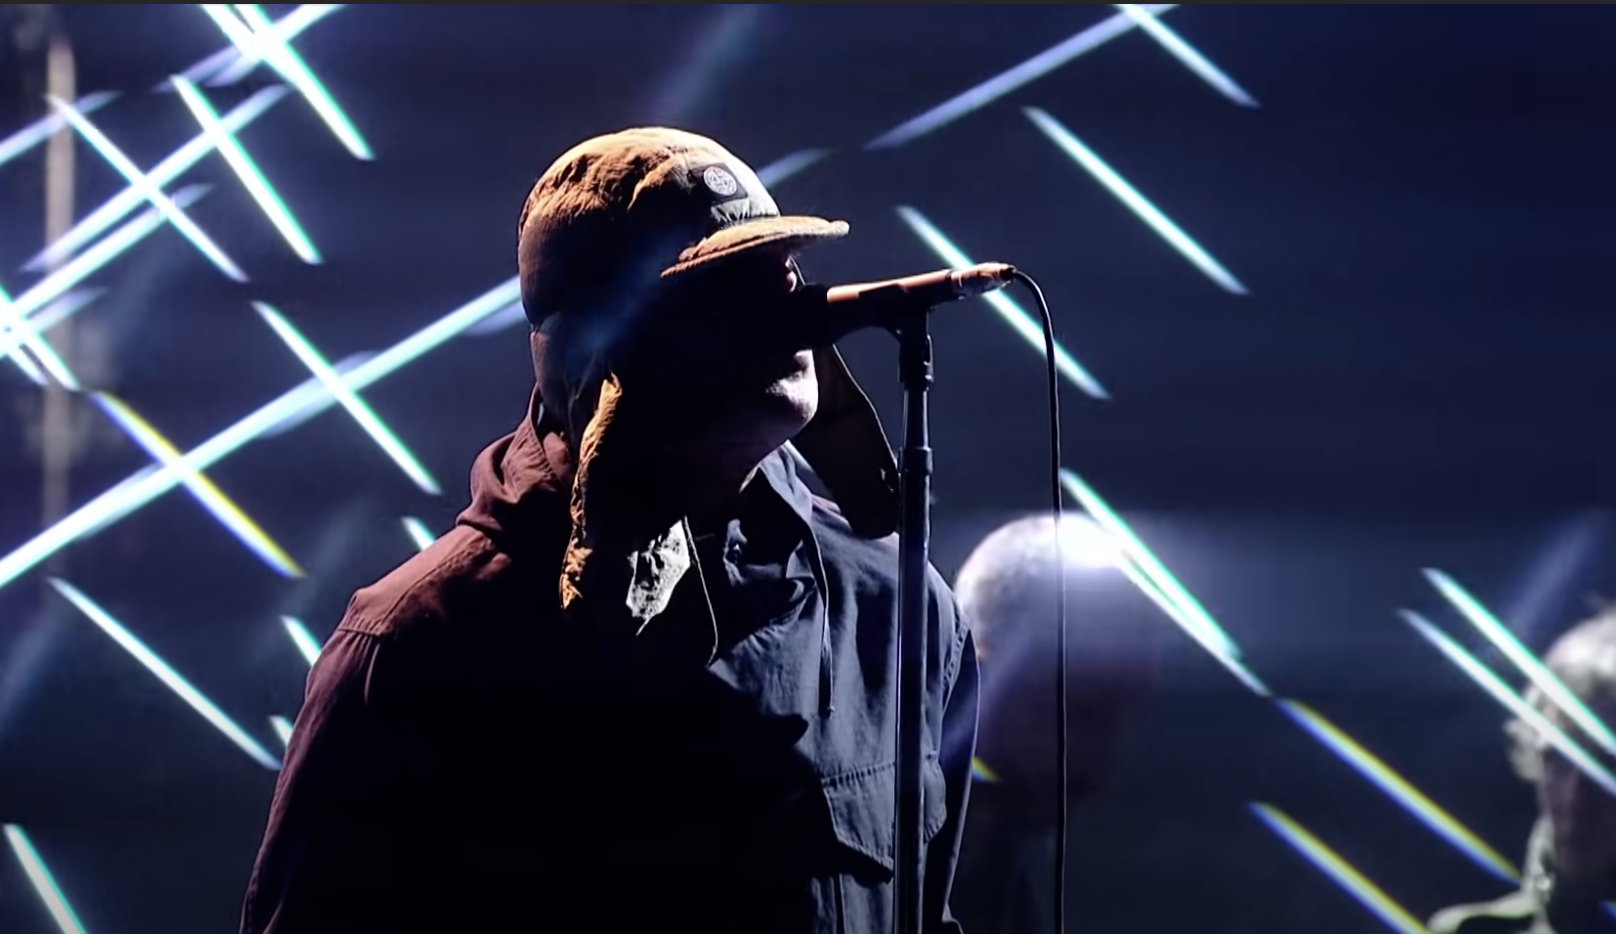 Liam Gallagher Performs ‘Everything’s Electric’ Live at Brit Awards